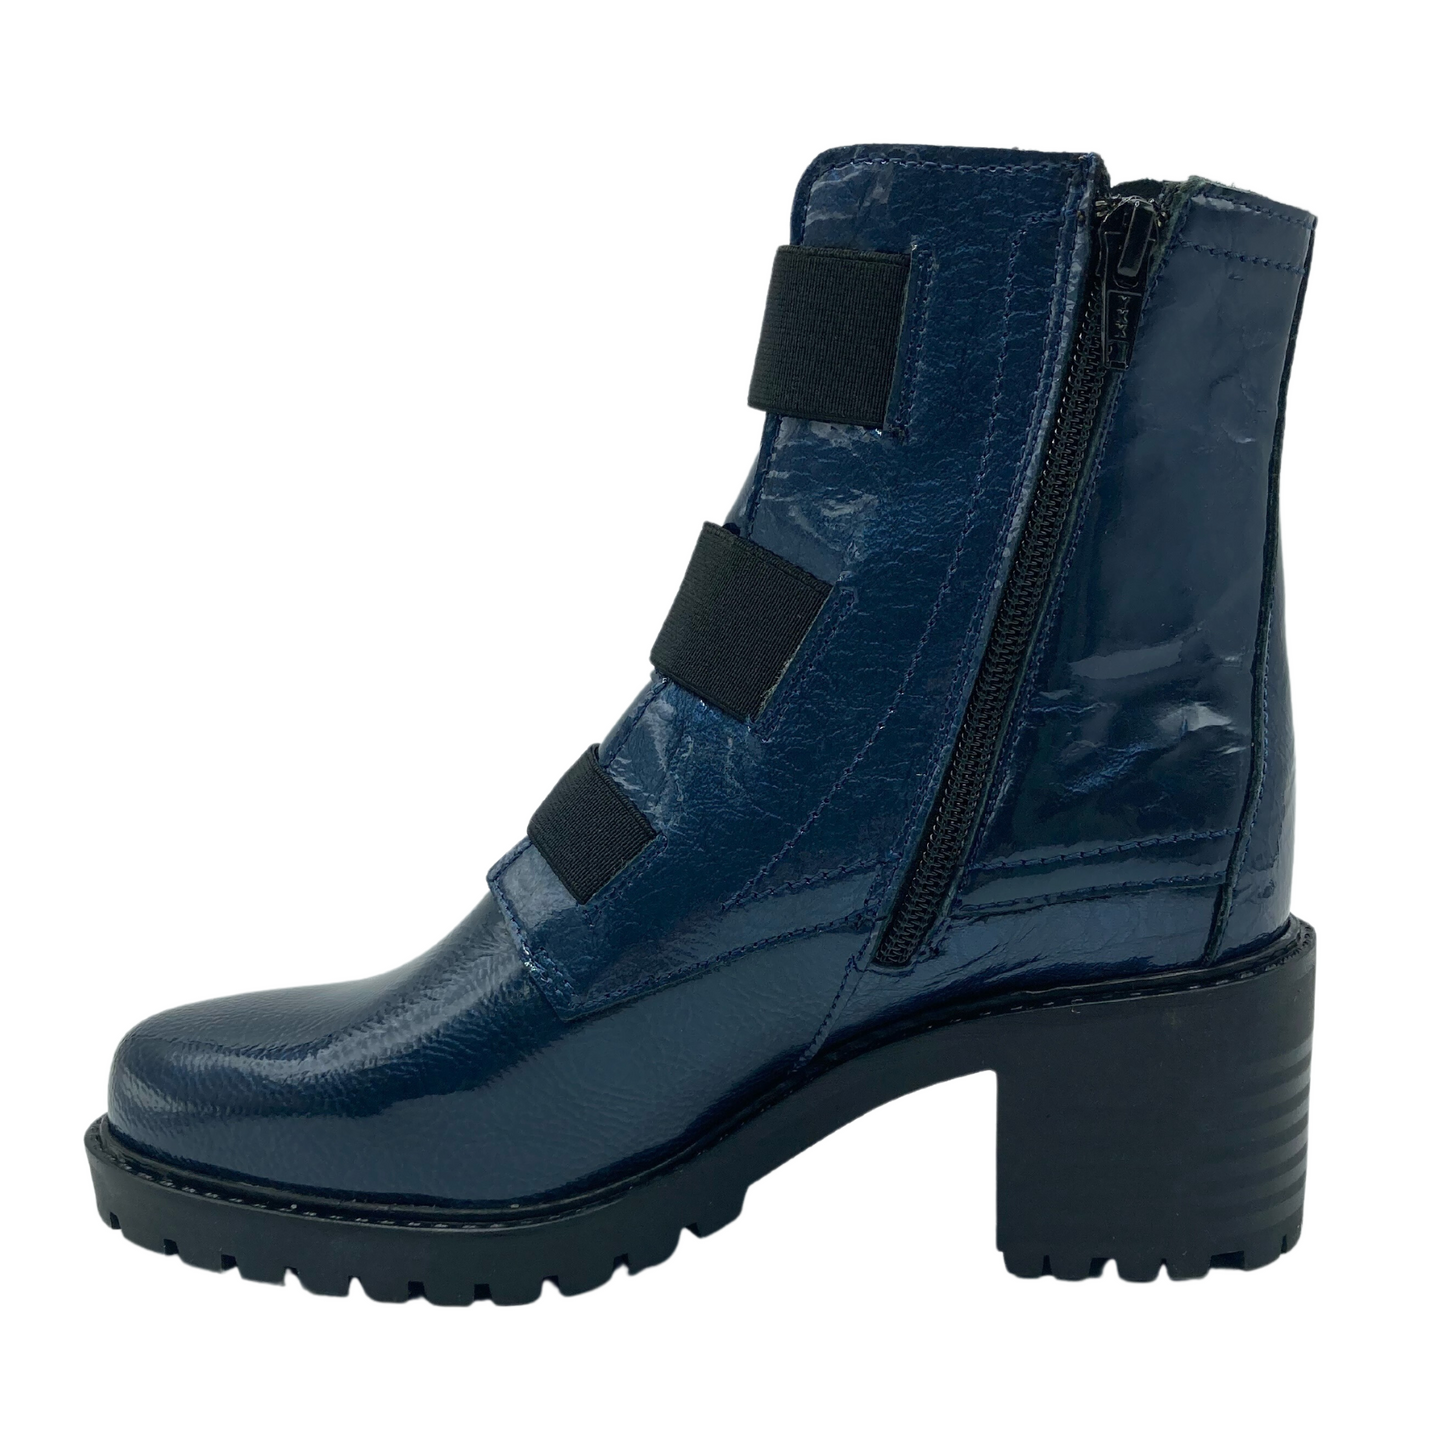 Left facing view of blue patent leather short boot with chunky black heel and black side zipper